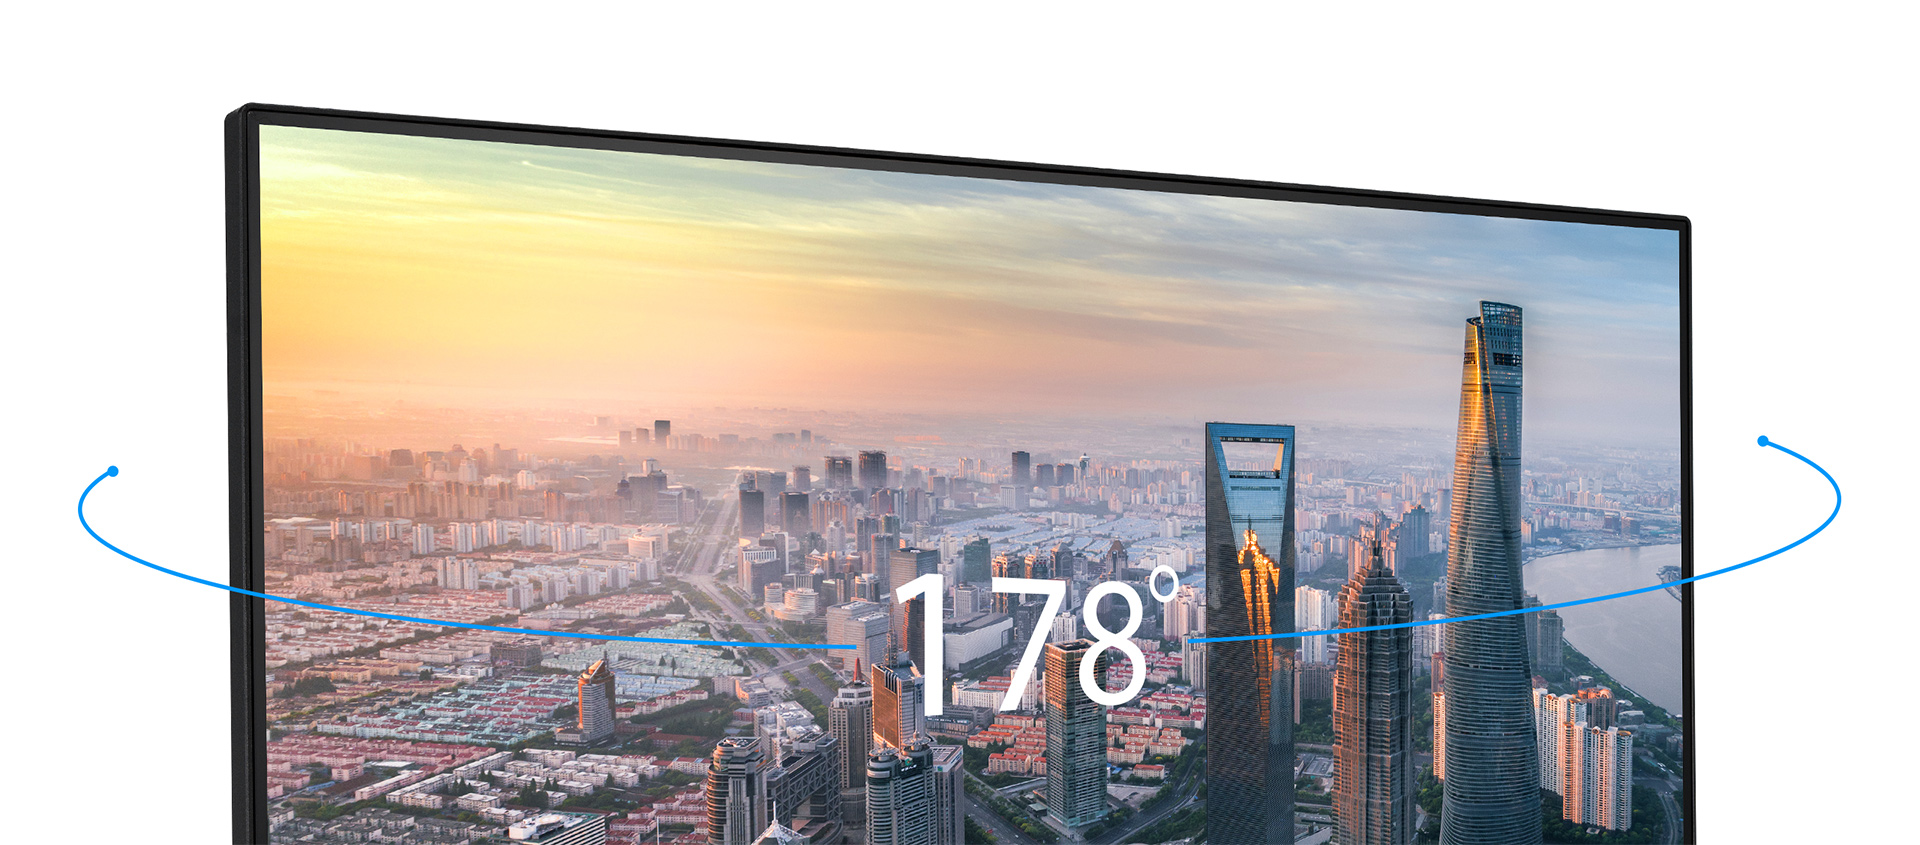 ASUS VA24EQSB monitor features wide 178° viewing angles